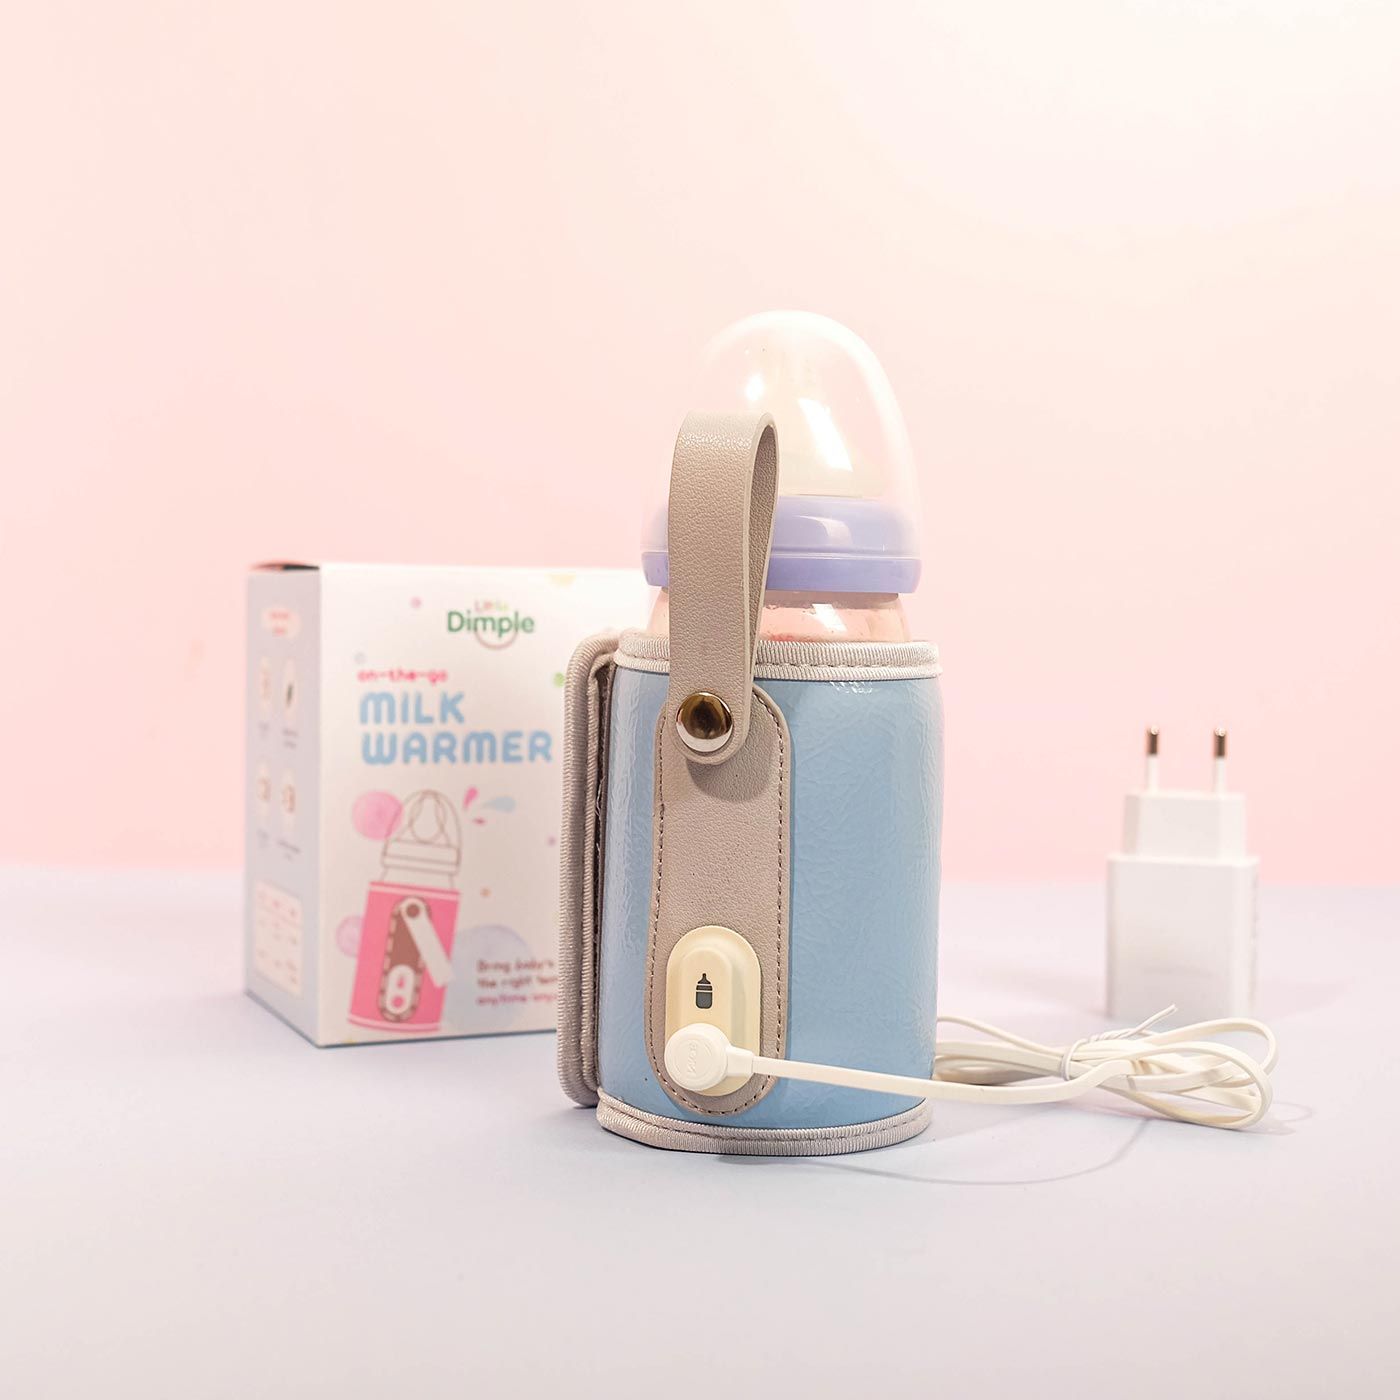 Little Dimple On-The-Go Milk Warmer Round